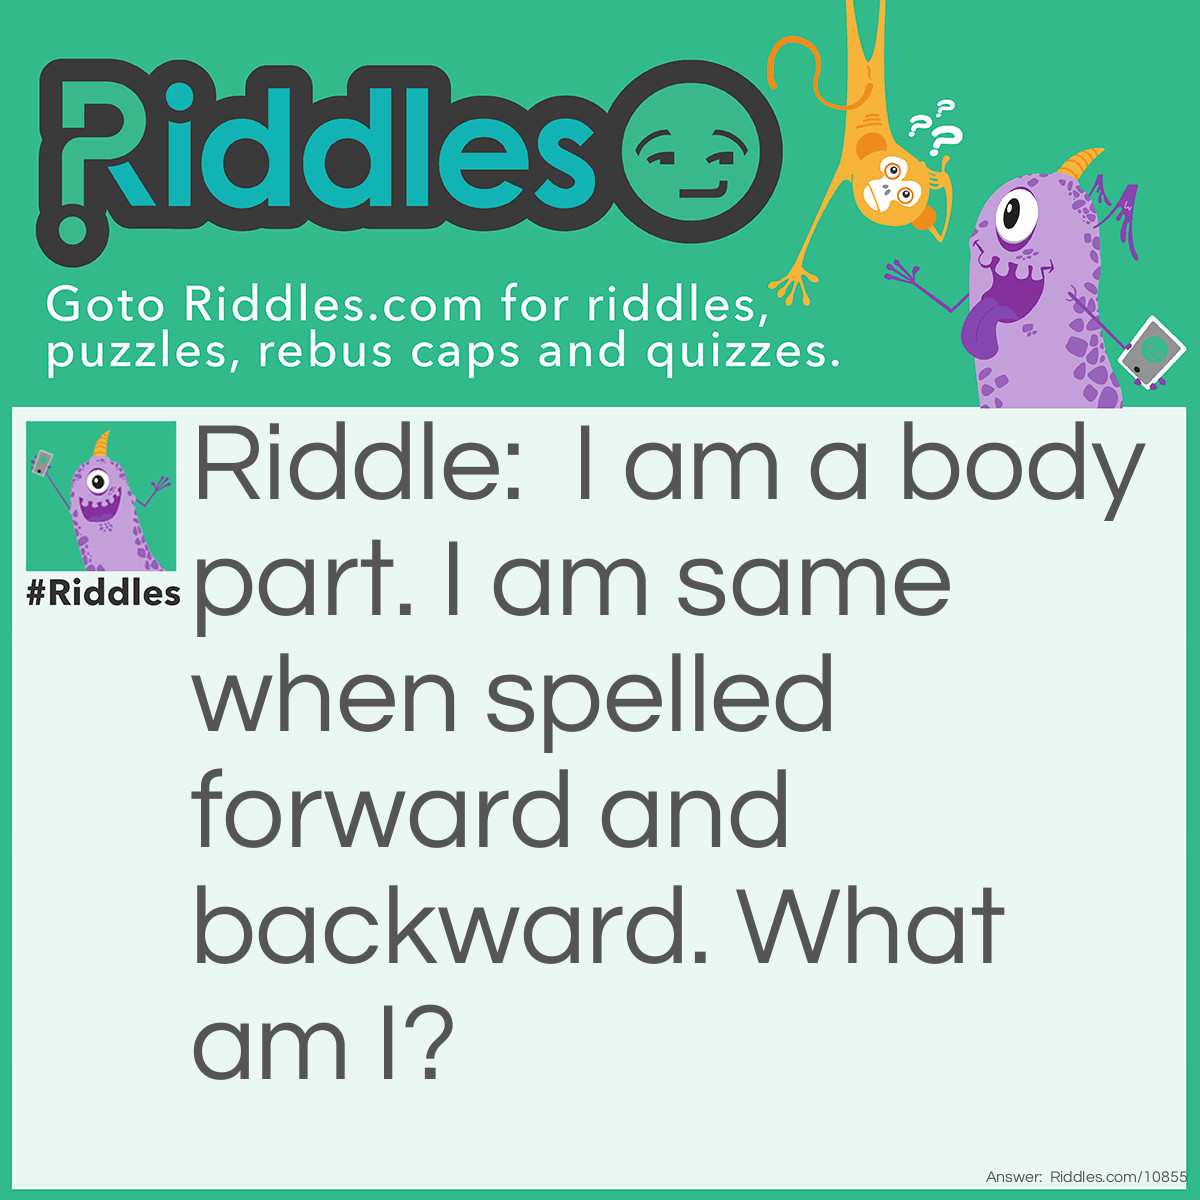 Riddle: I am a body part. I am same when spelled forward and backward. What am I? Answer: Rotator.